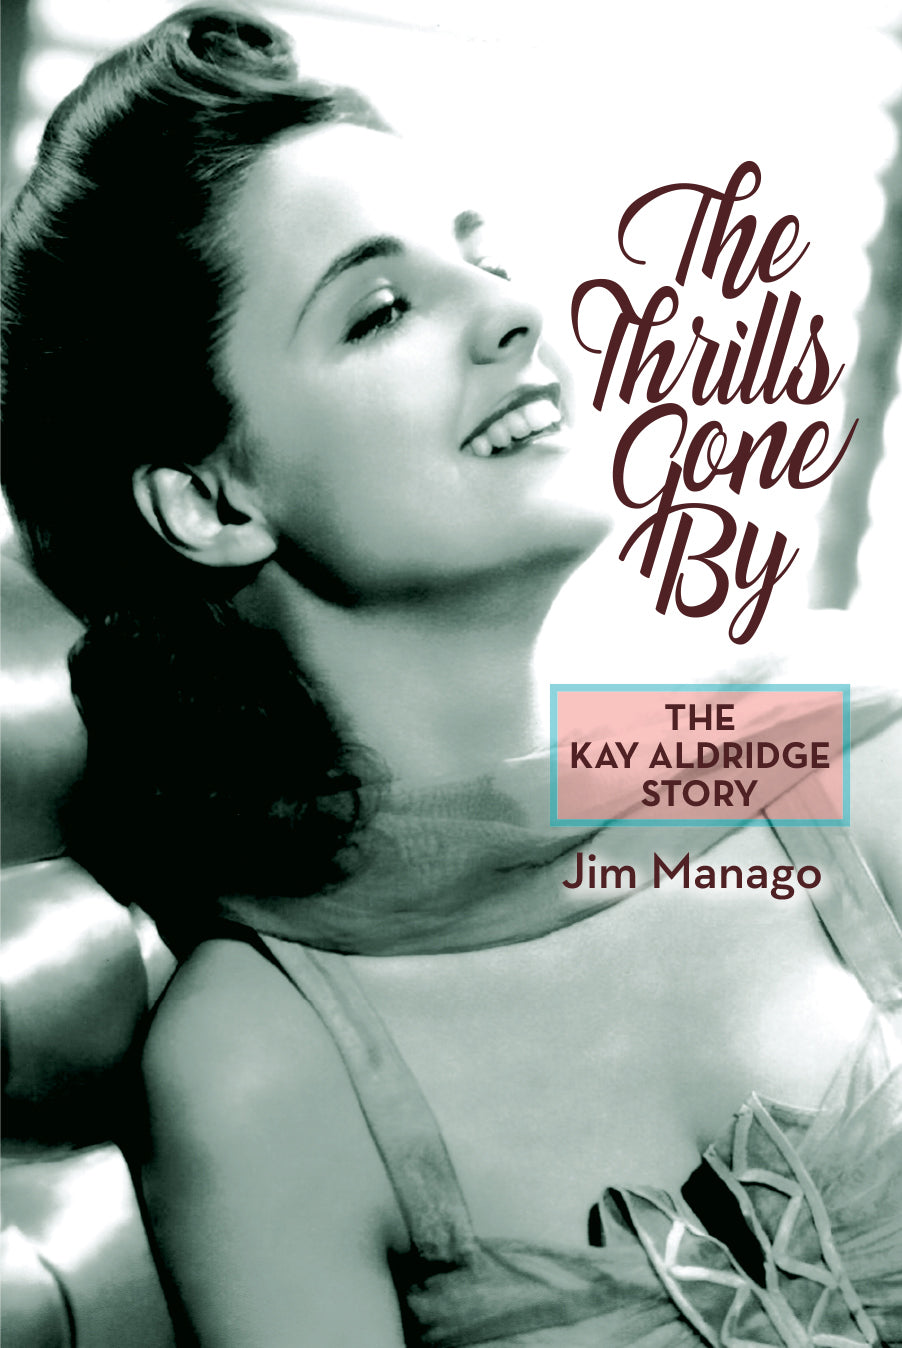 THE THRILLS GONE BY: THE KAY ALDRIDGE STORY (SOFTCOVER EDITION) by Jim Manago - BearManor Manor